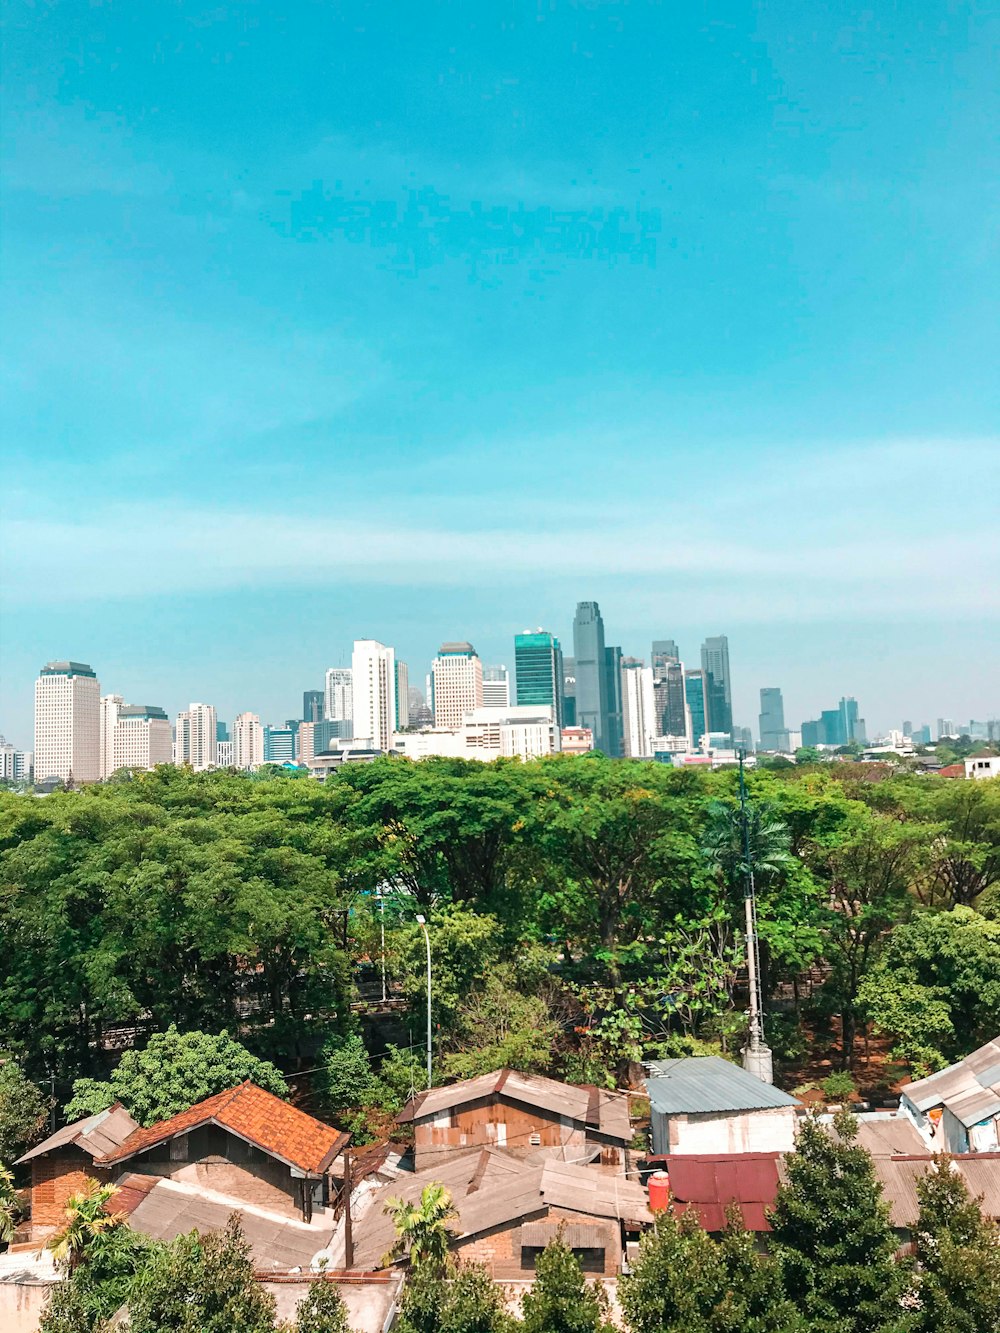 a view of a city skyline from a hill